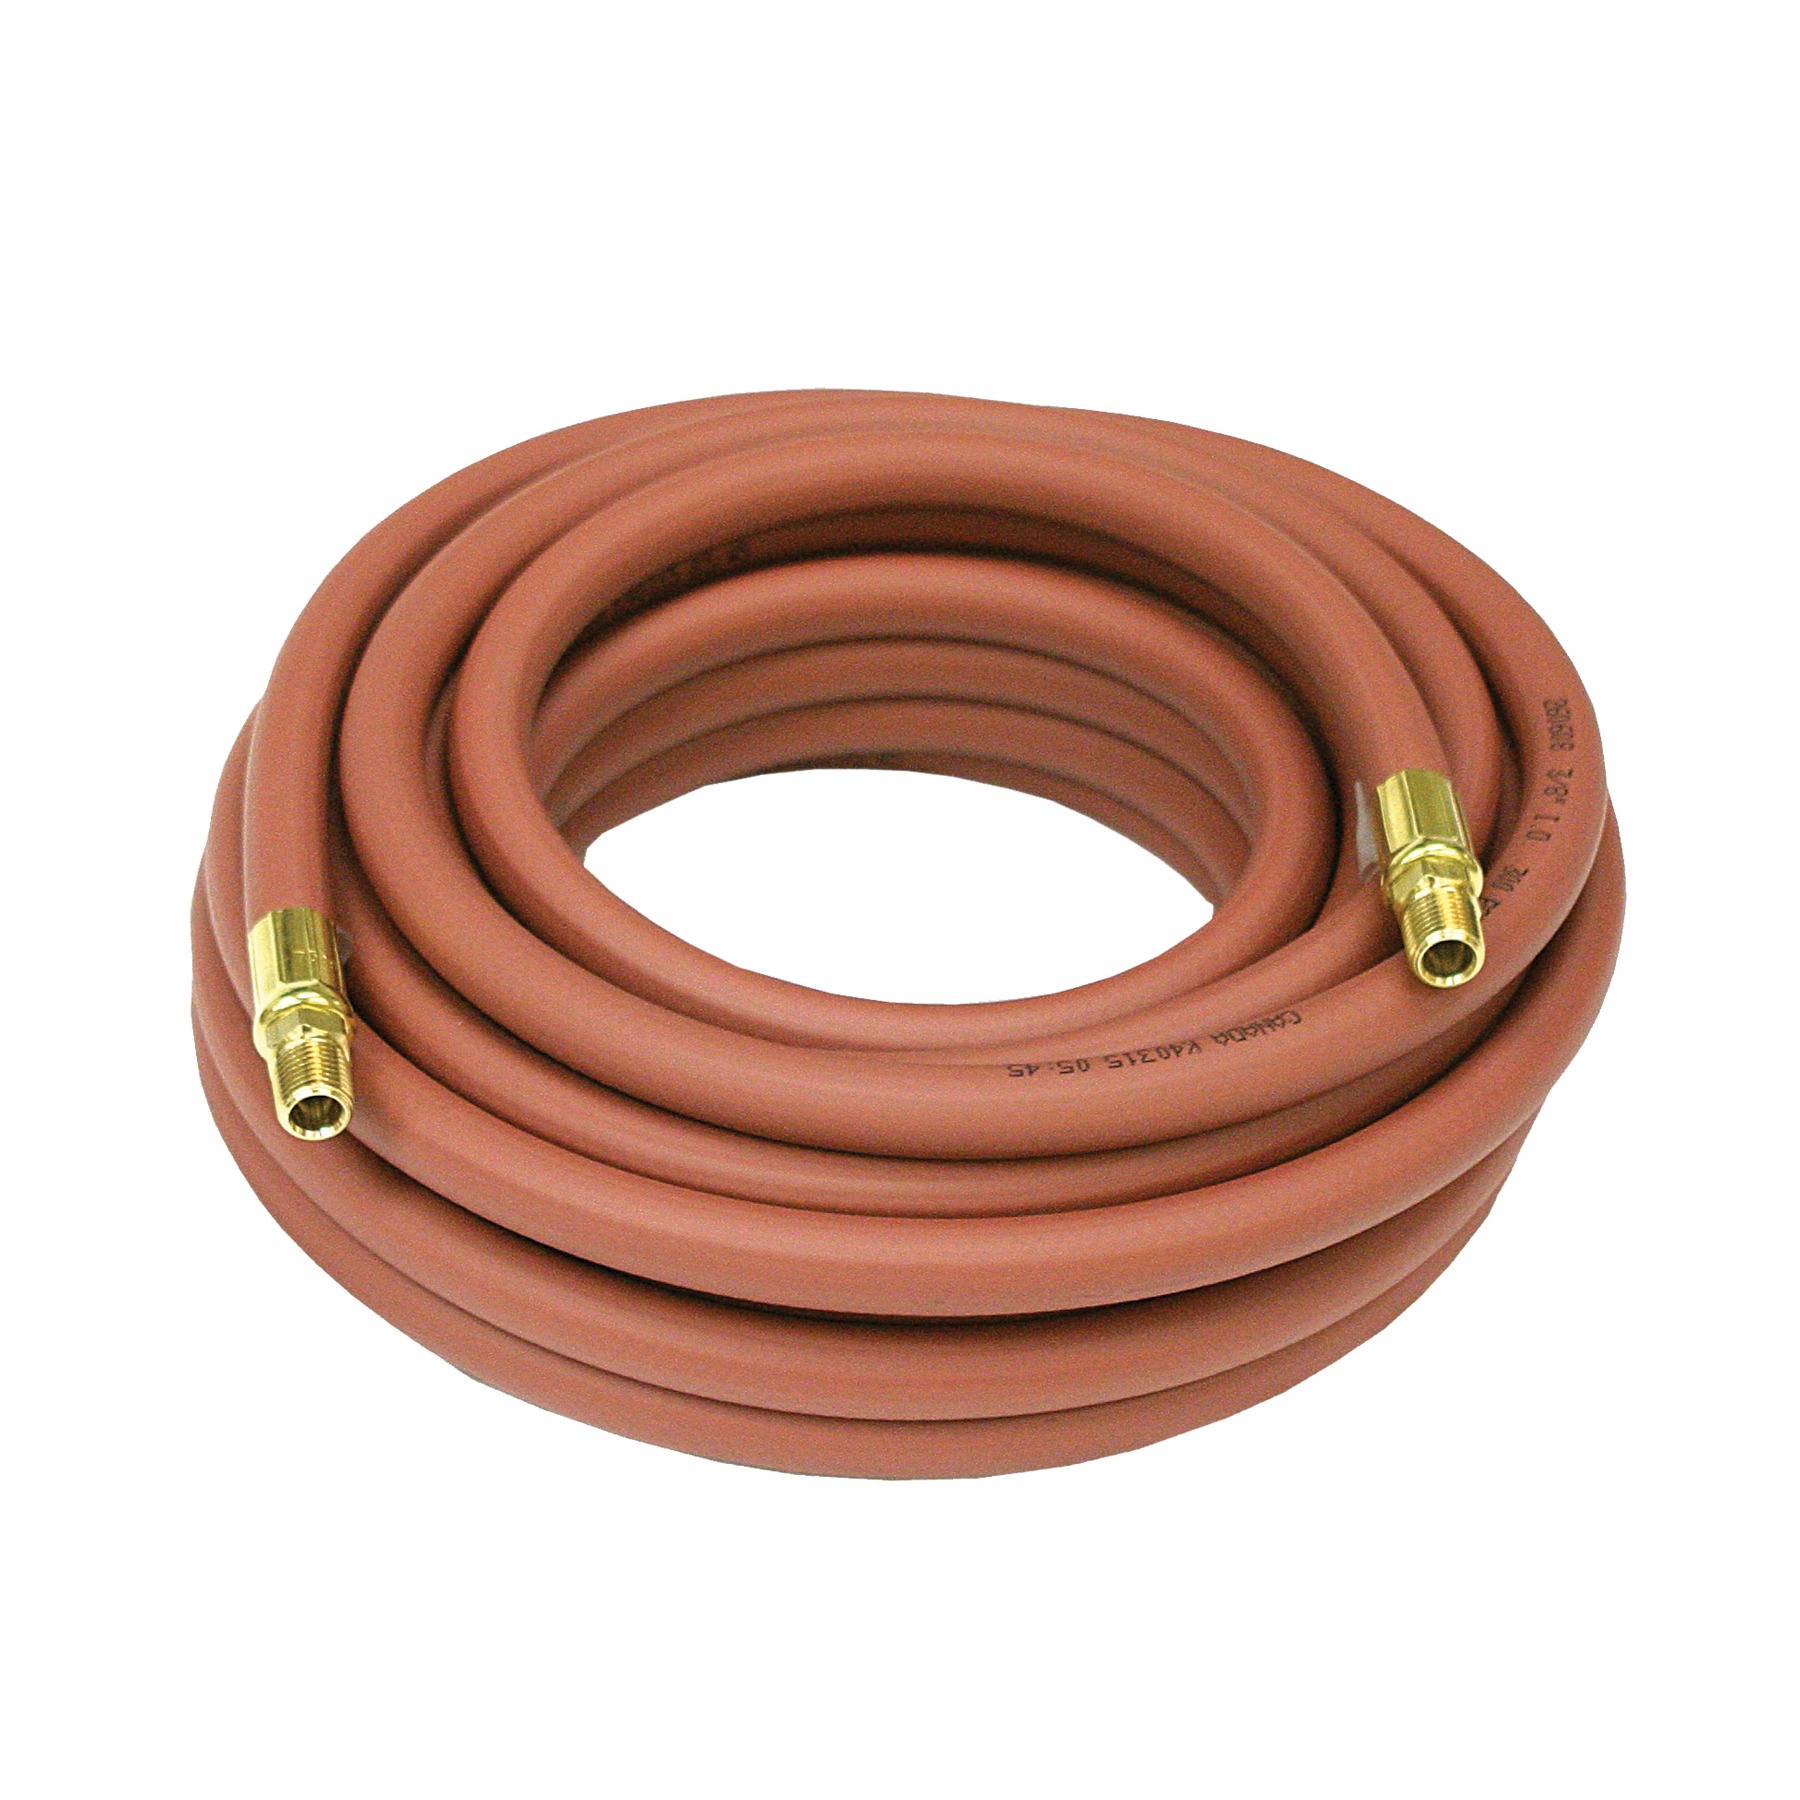 Reelcraft S601015-100 - 3/8 in. x 100 ft. Low Pressure Air/Water Hose